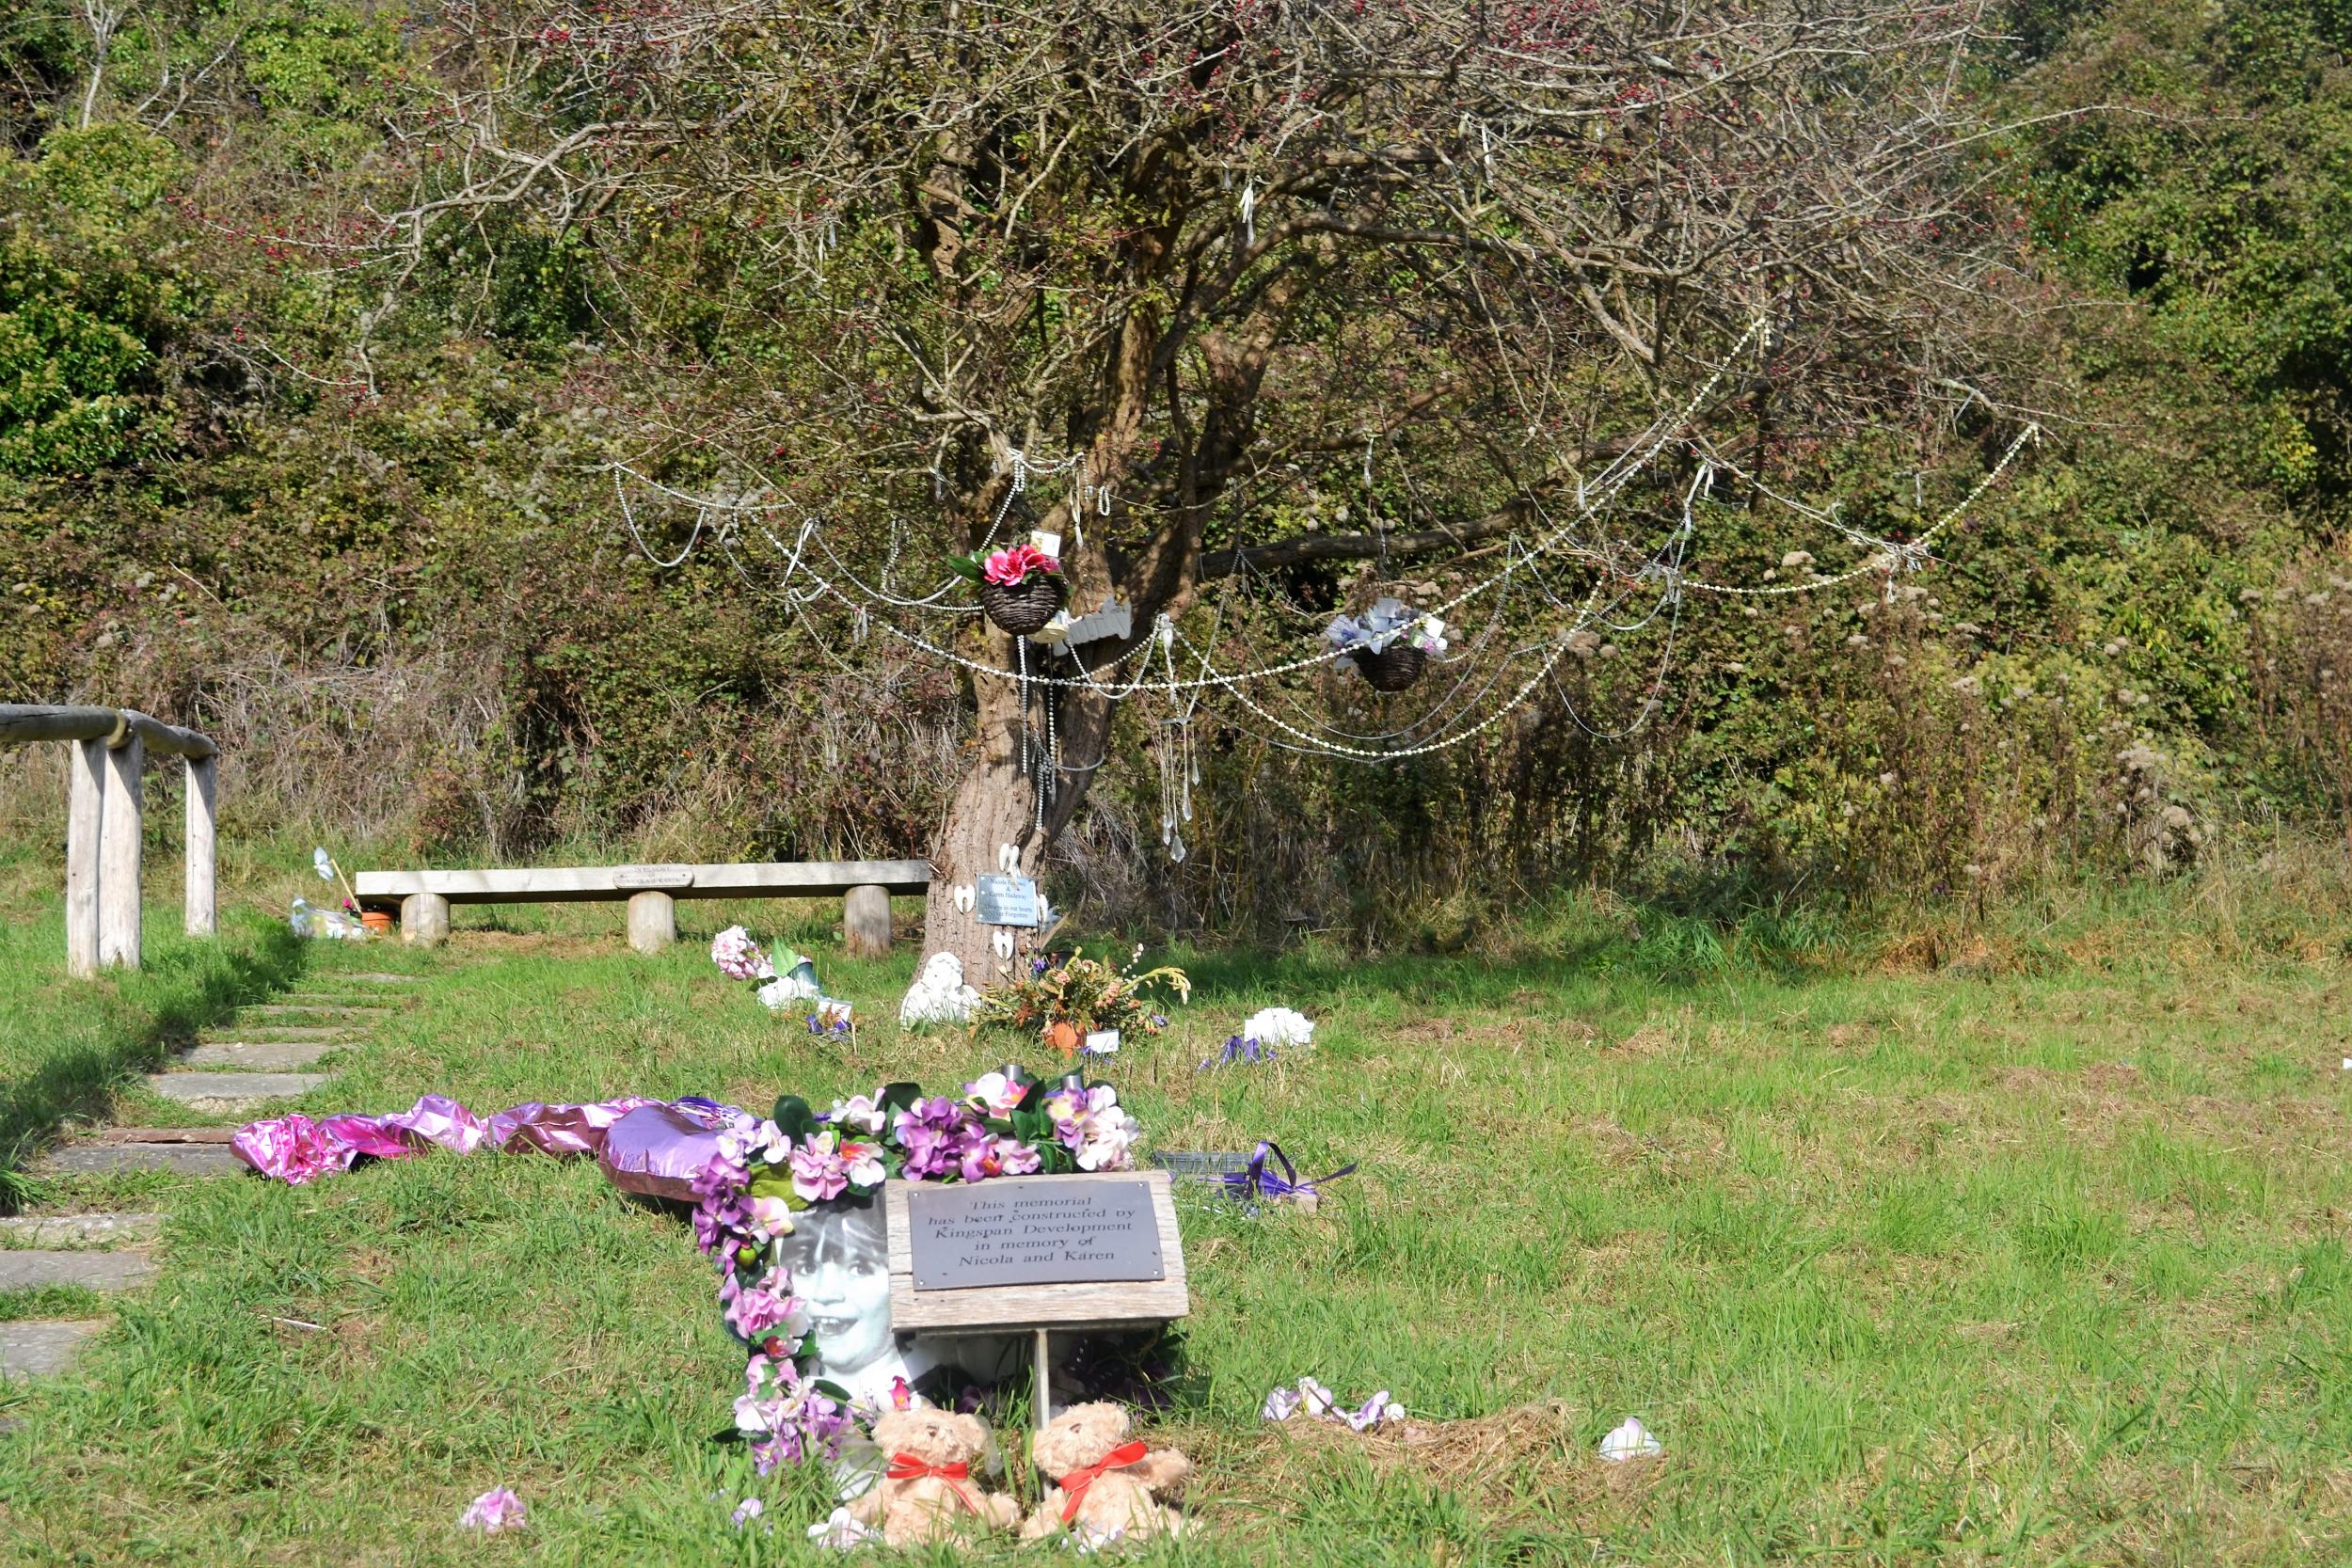 The memorial to Karen Hadaway and Nicola Fellows stands in Brighton’s Wild Park at the tree where they were seen playing shortly before they disappeared